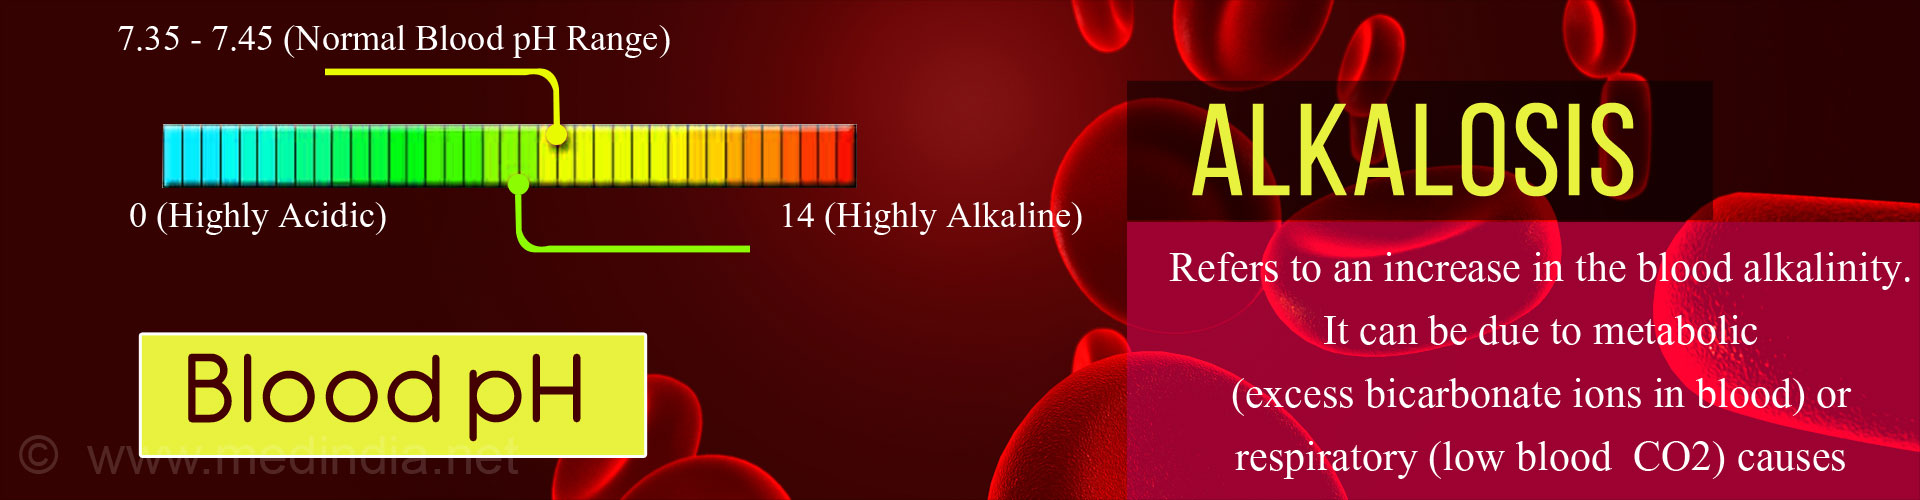 Alkalosis refers to an increase in the blood alkalinity. It can be due to metabolic (excess bicarbonate ions in blood) or respiratory (low blood CO2) causes.
7.35-7.45 (normal blood pH range)
0 (highly acidic) 14 (highly alkaline)
